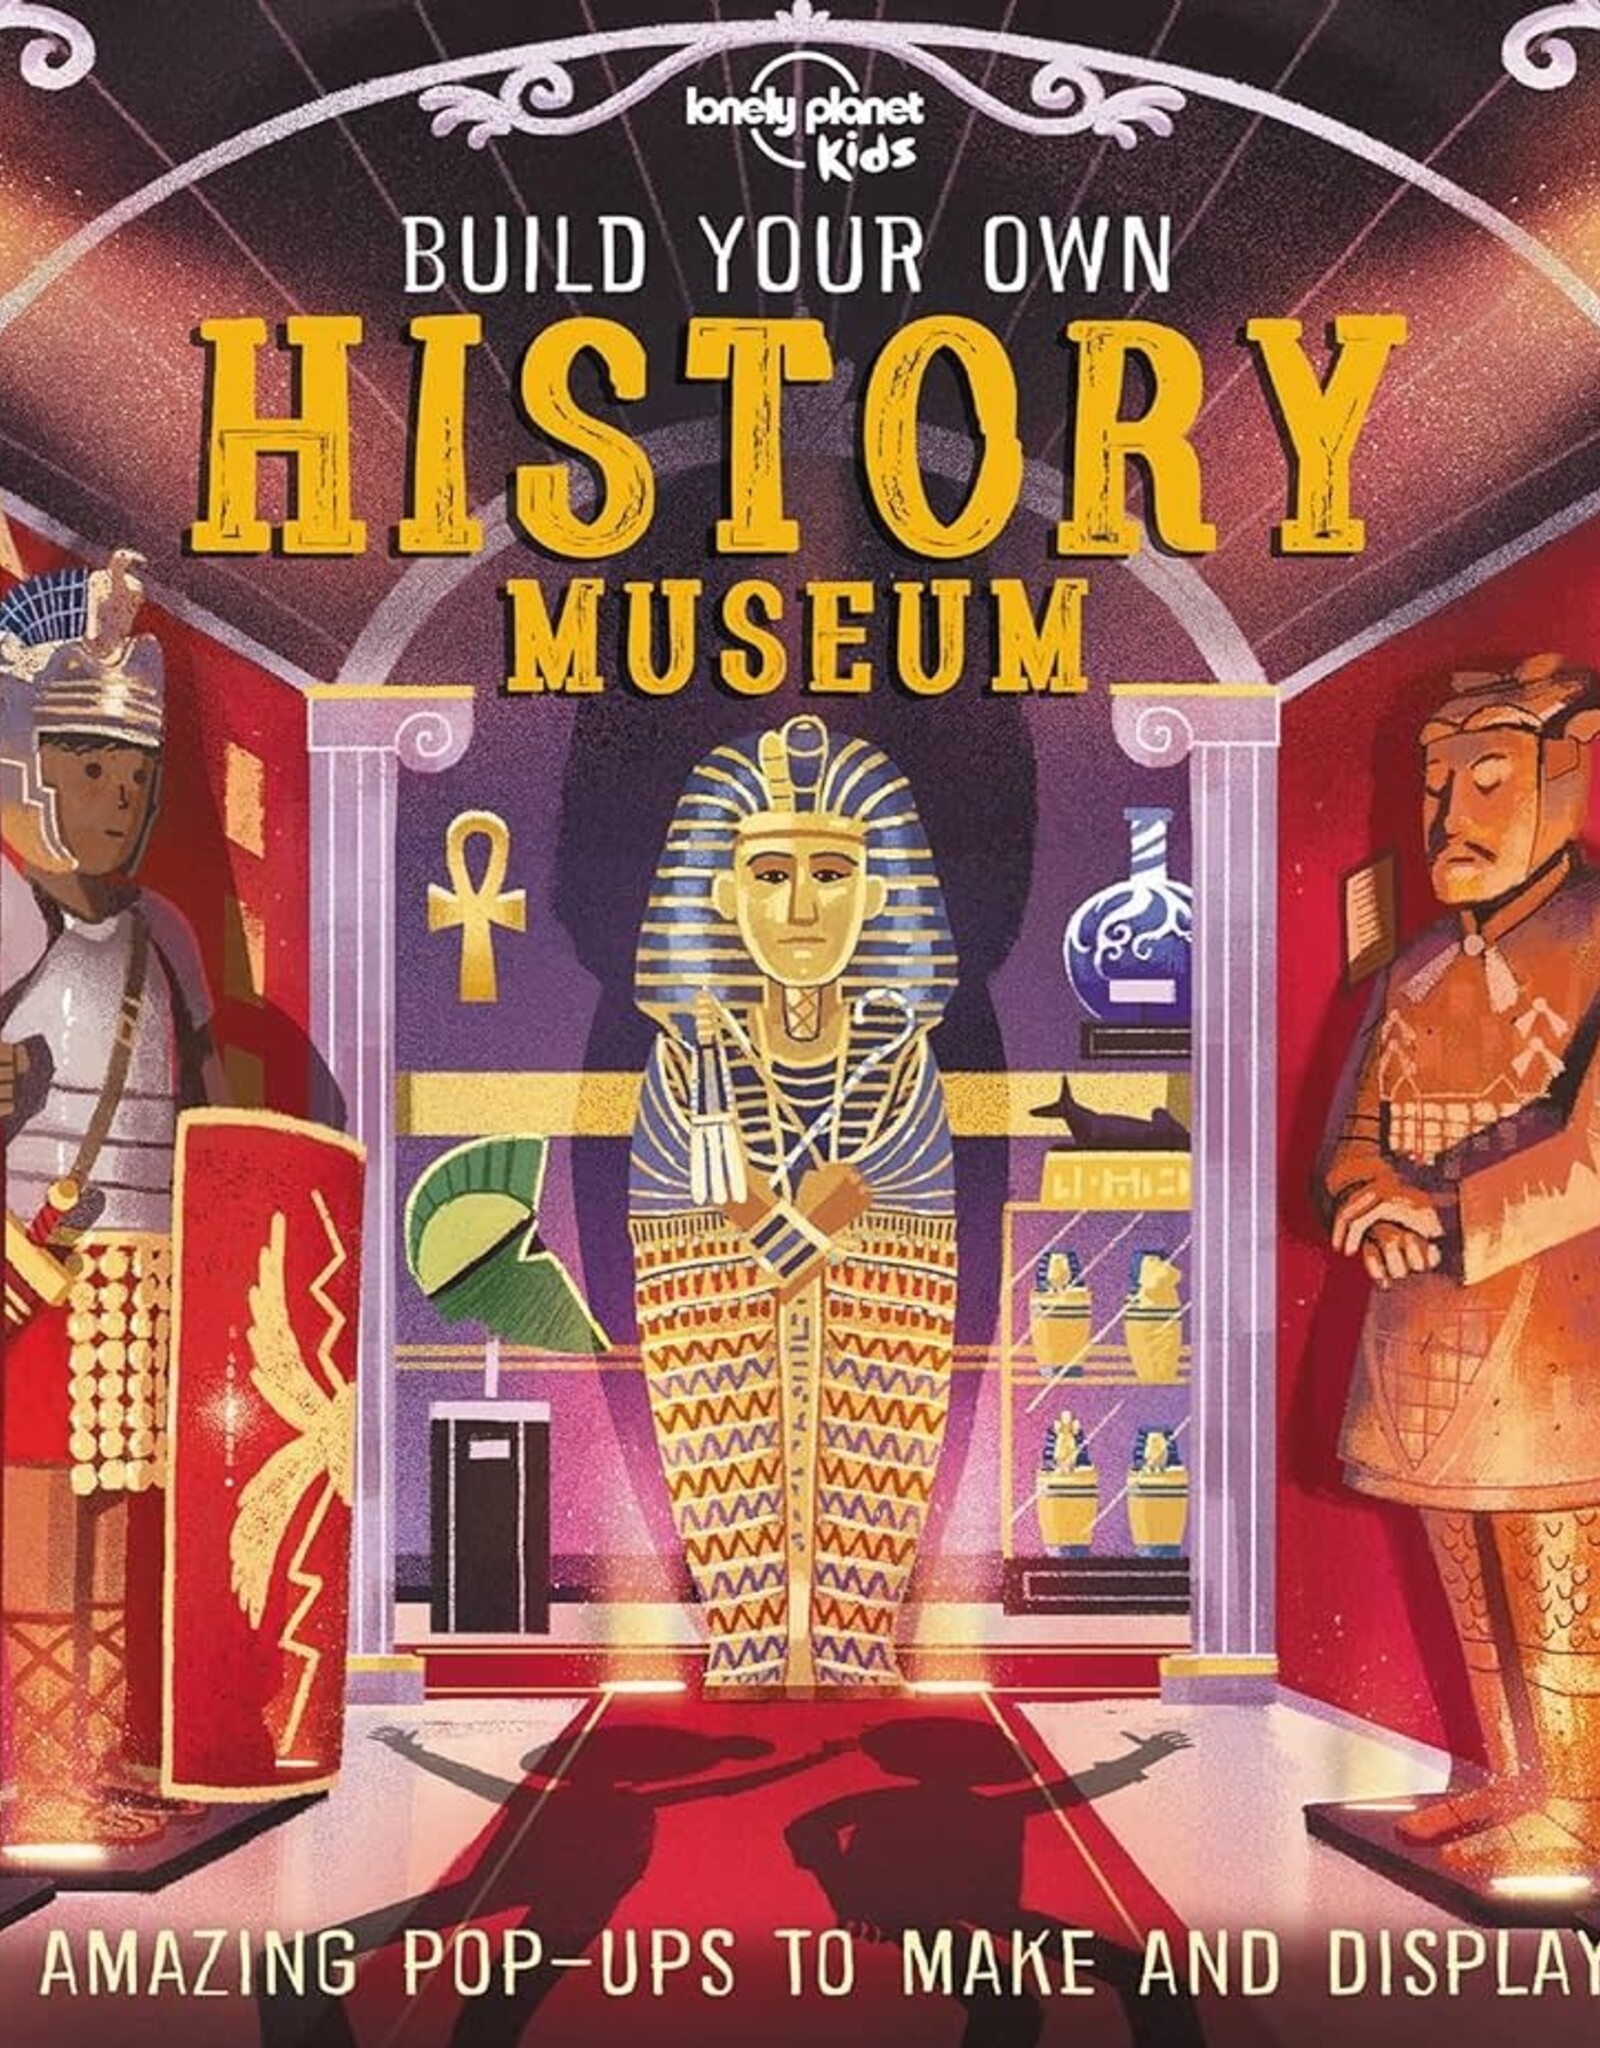 BOOK PUBLISHERS HISTORY MUSEUM BUILD YOUR OWN